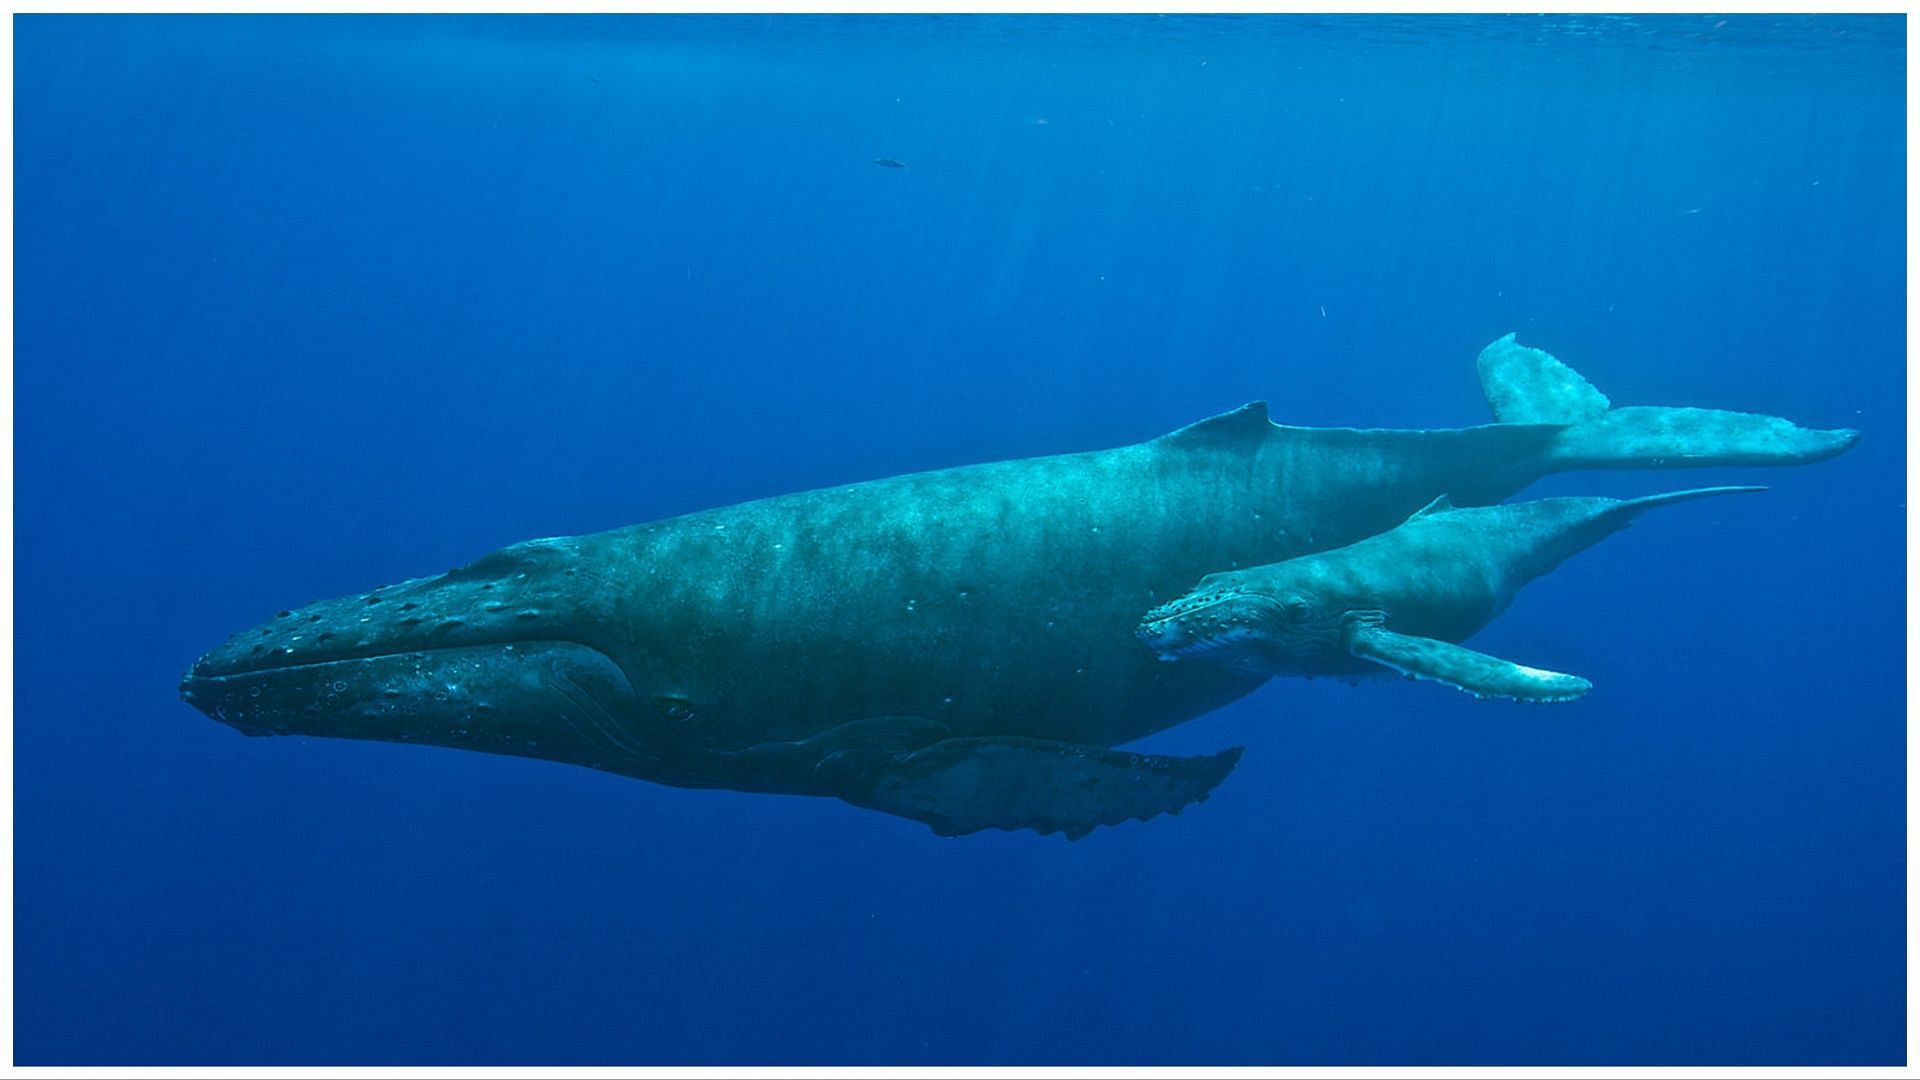 The birth of the humpback whale was caught on camera (Image via National Oceanic and Atmospheric Administration)